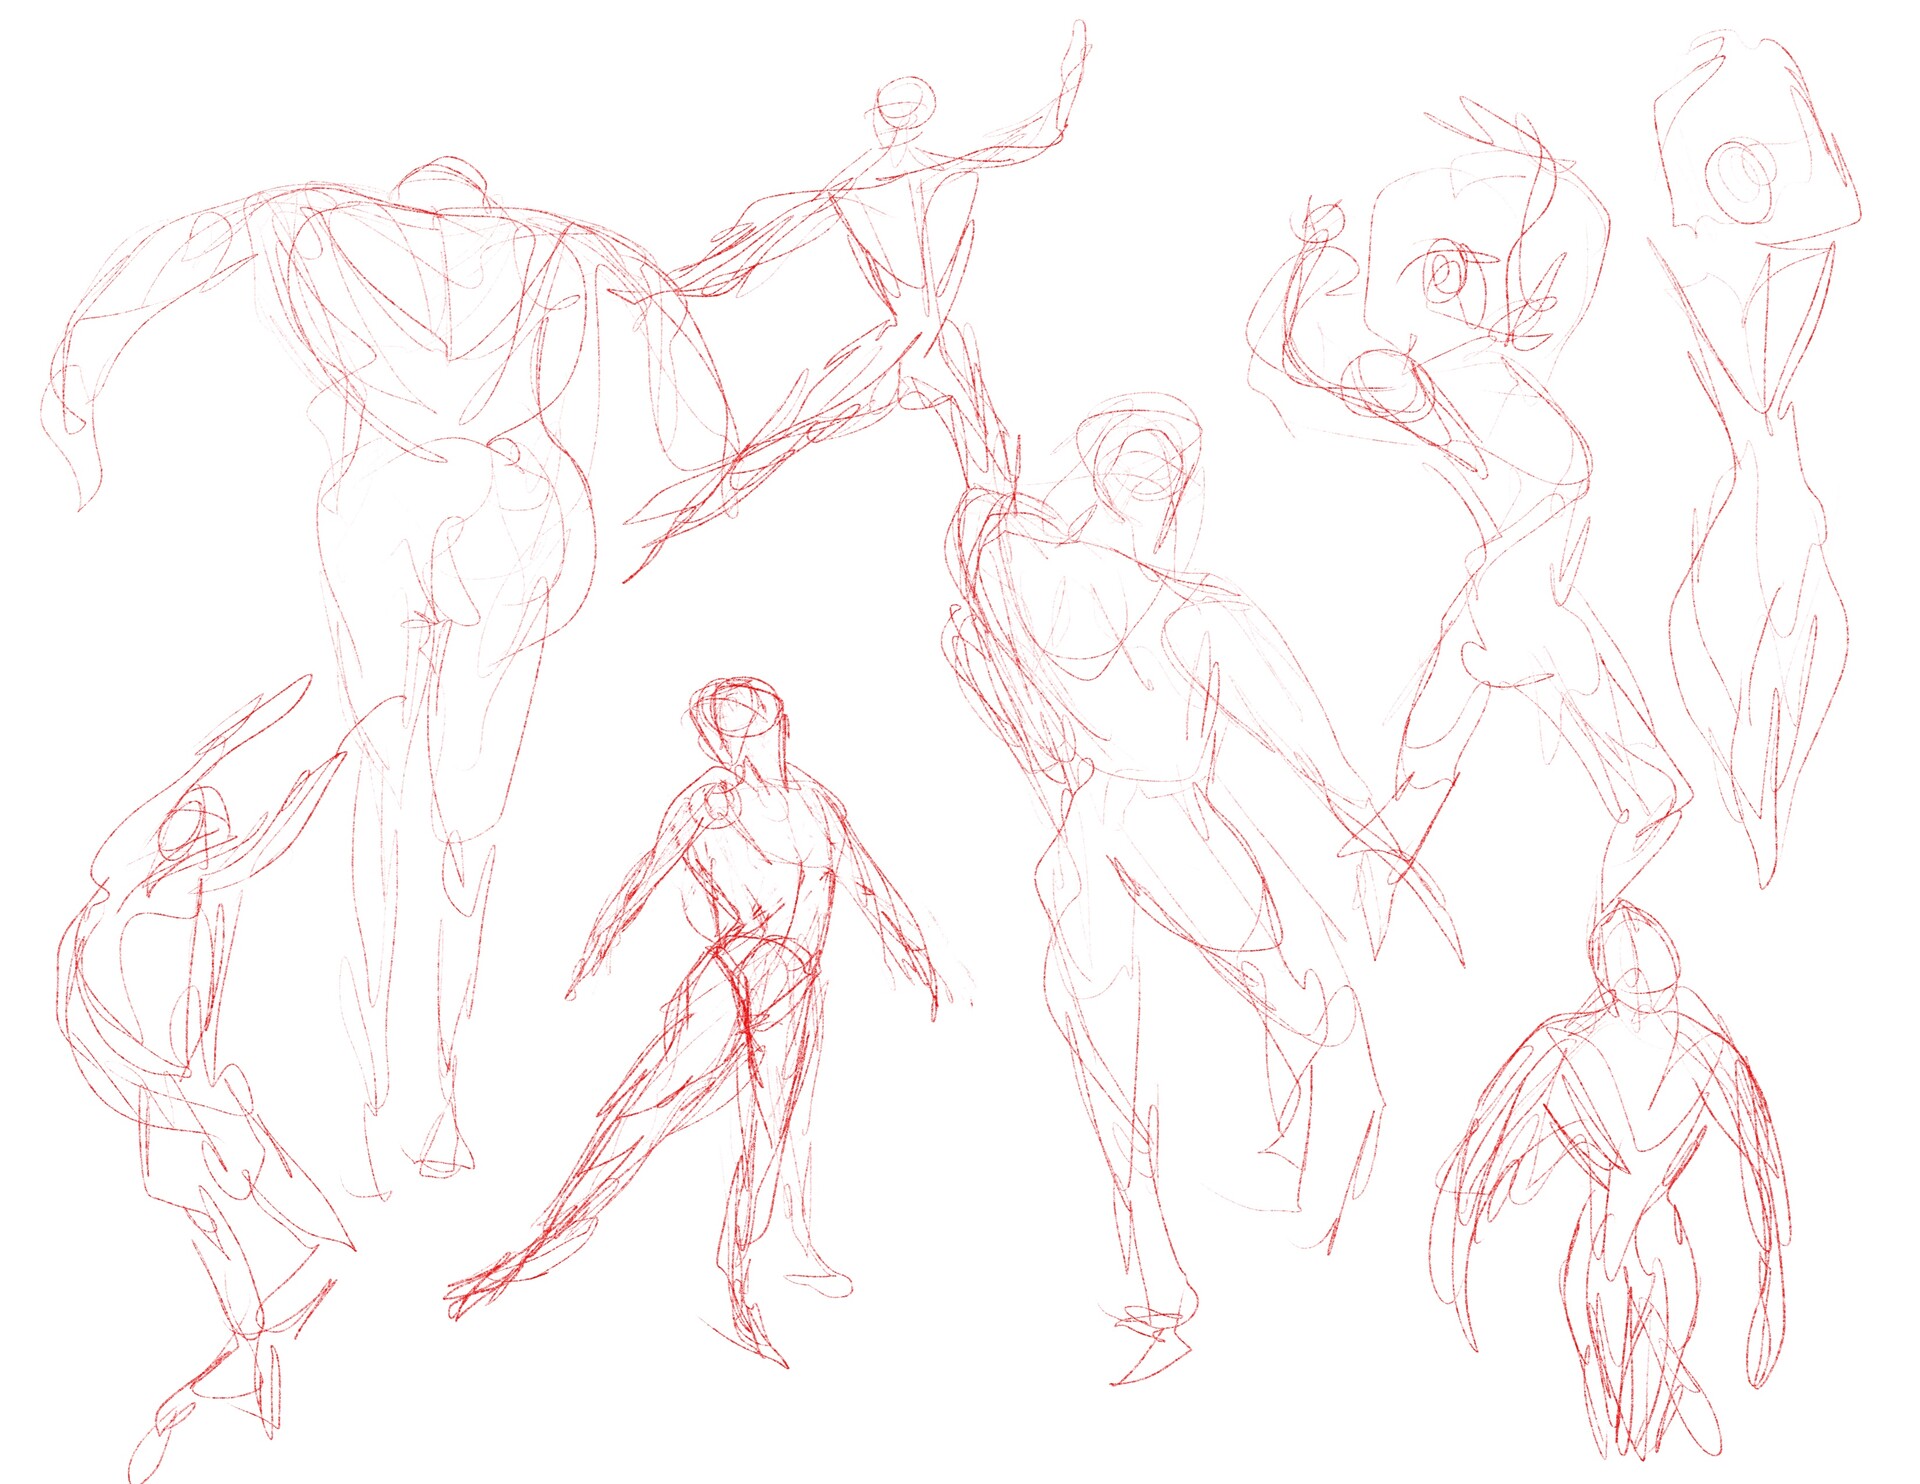 Wip, Working on some dance pose illustrations:) : r/sketches